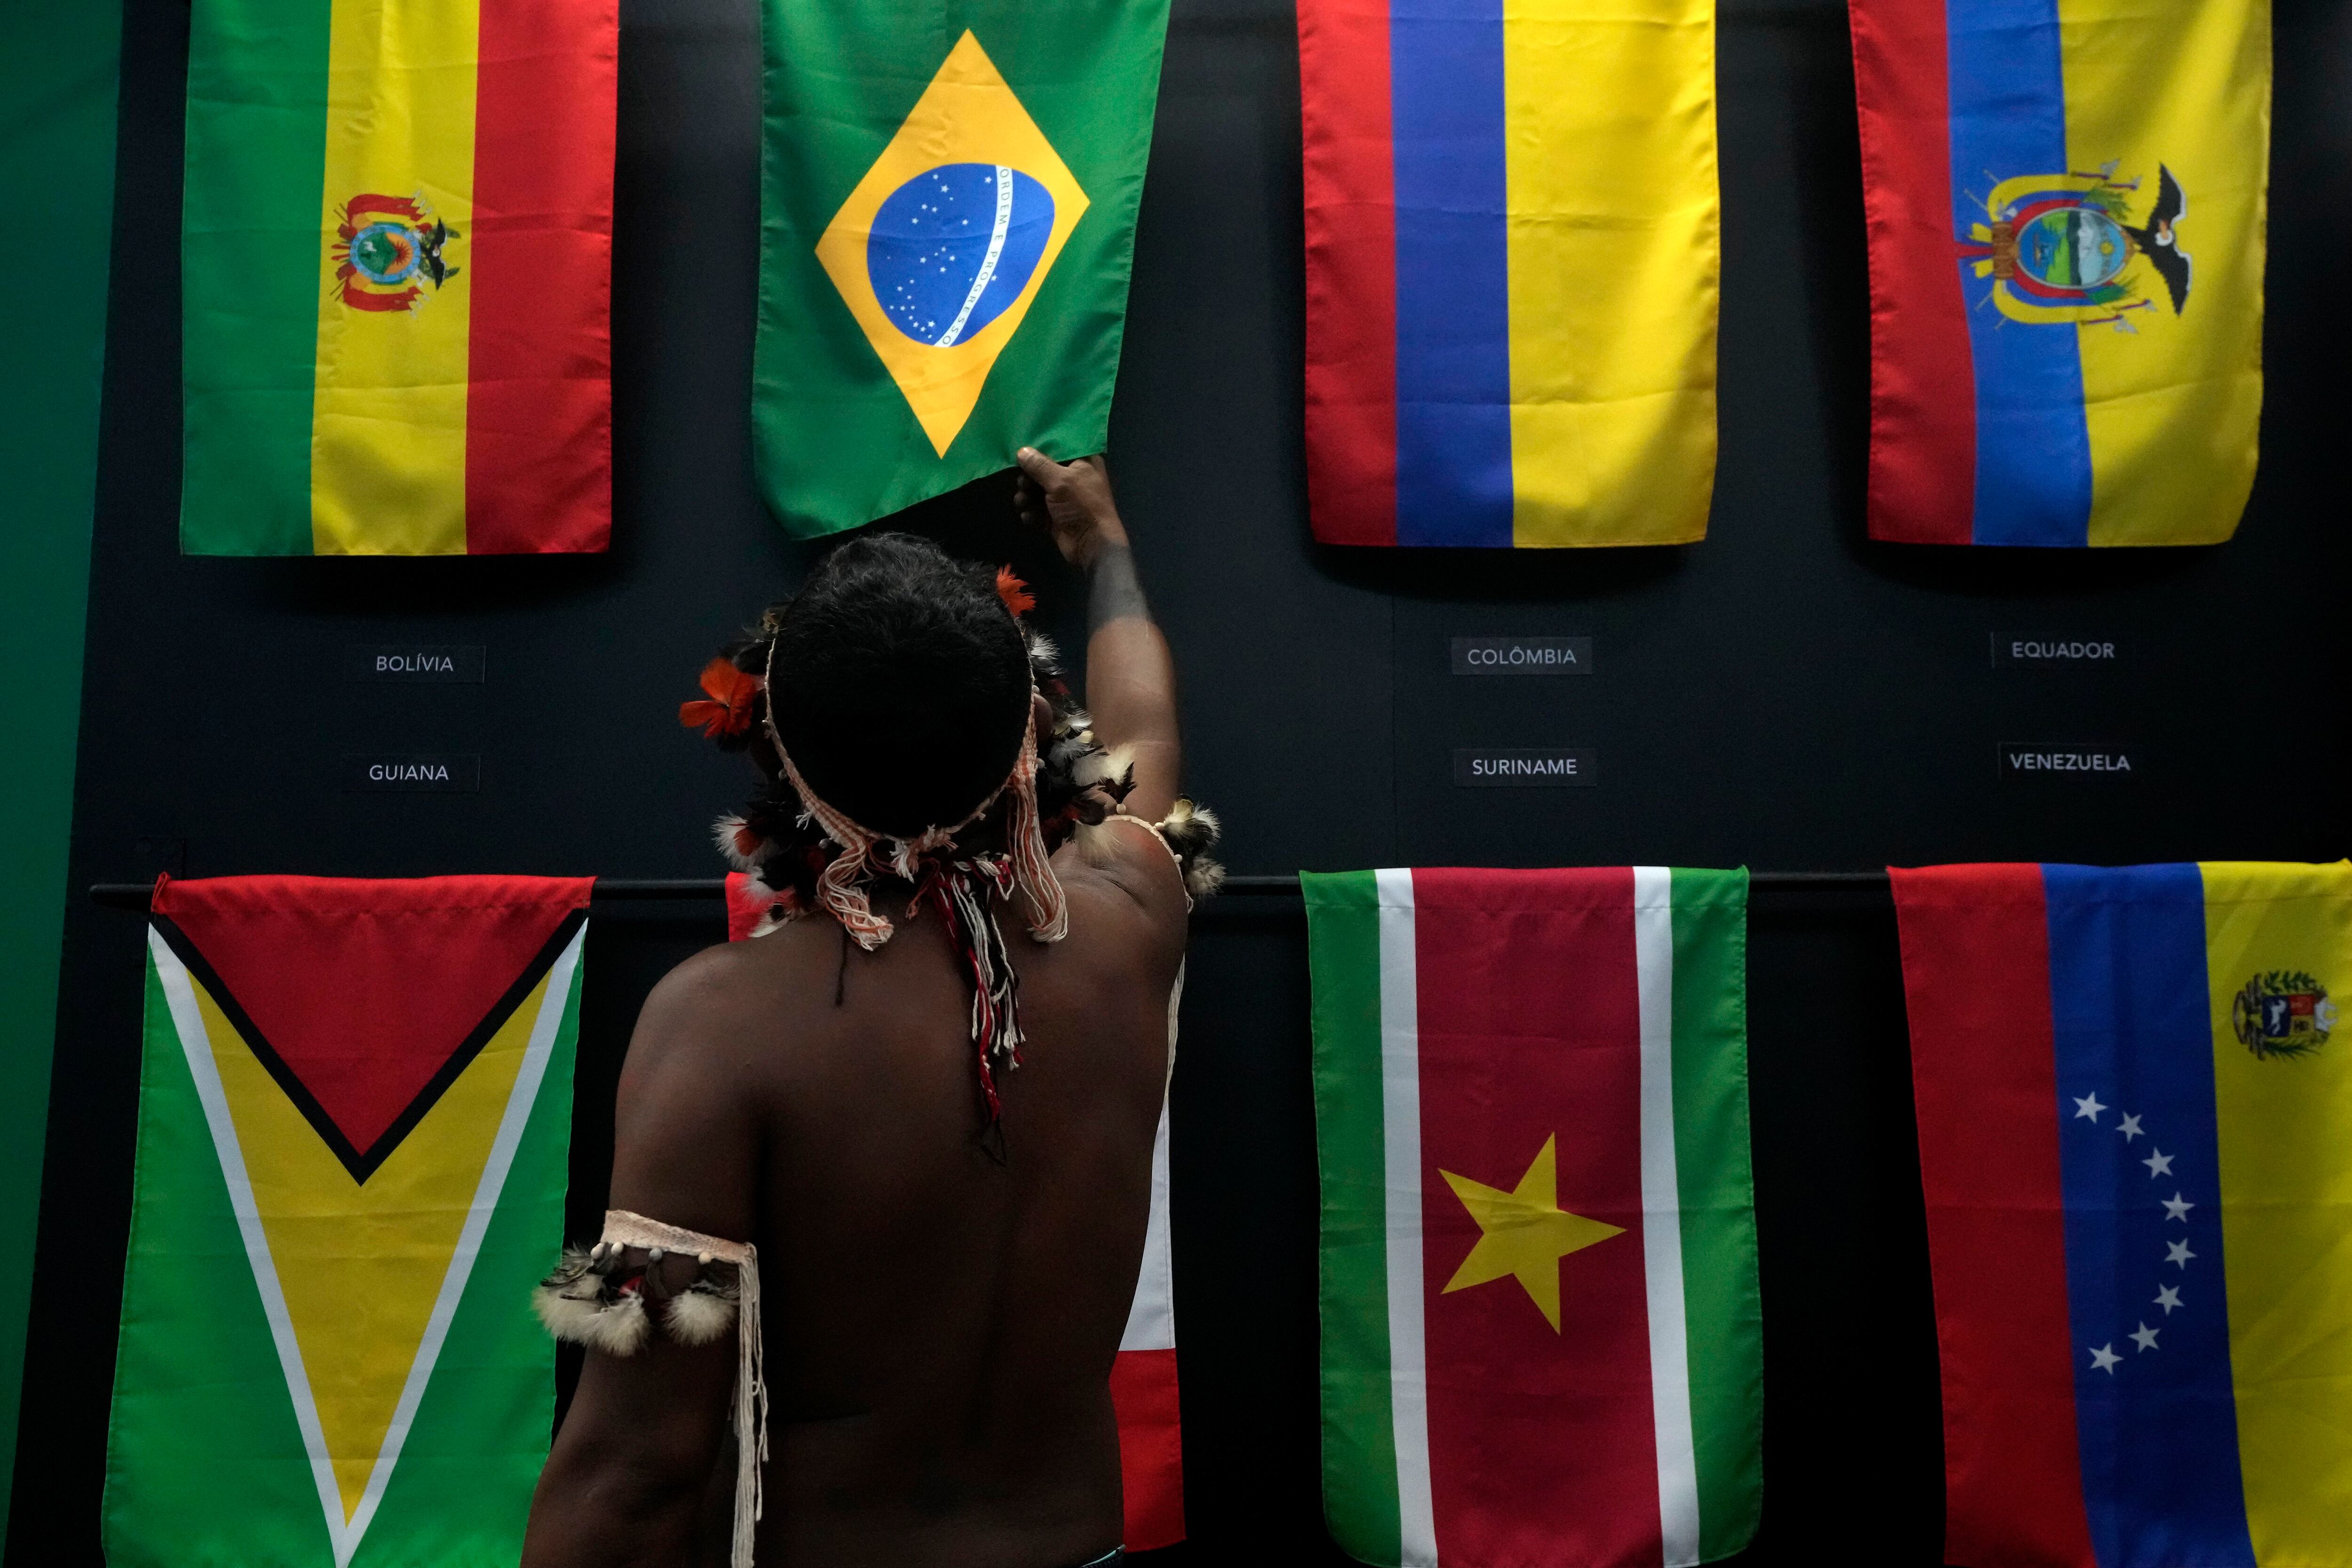 Brazil has 1.7 million Indigenous people, near double the count from prior census, government says